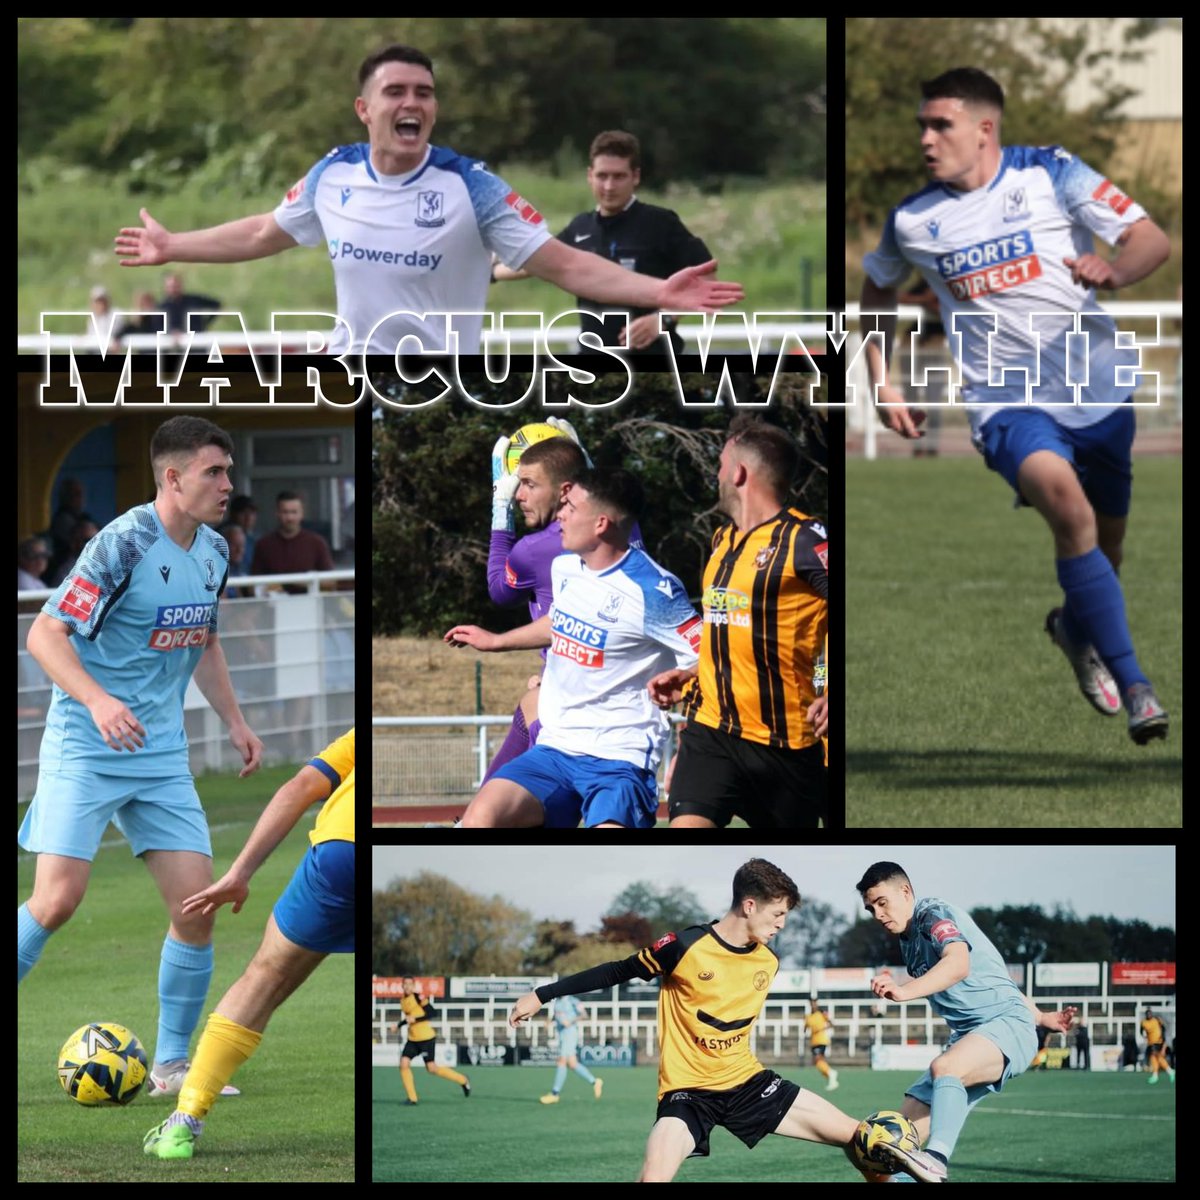 My Isthmian Premier League Player of the Season is Marcus Wyllie. 30 League Goals but more than the goals Marcus's performances this season have been top quality and played a big part in Enfields superb season. Top player! @marcus_w91 @ETFCOfficial 👏👏👏👏👏👏👏